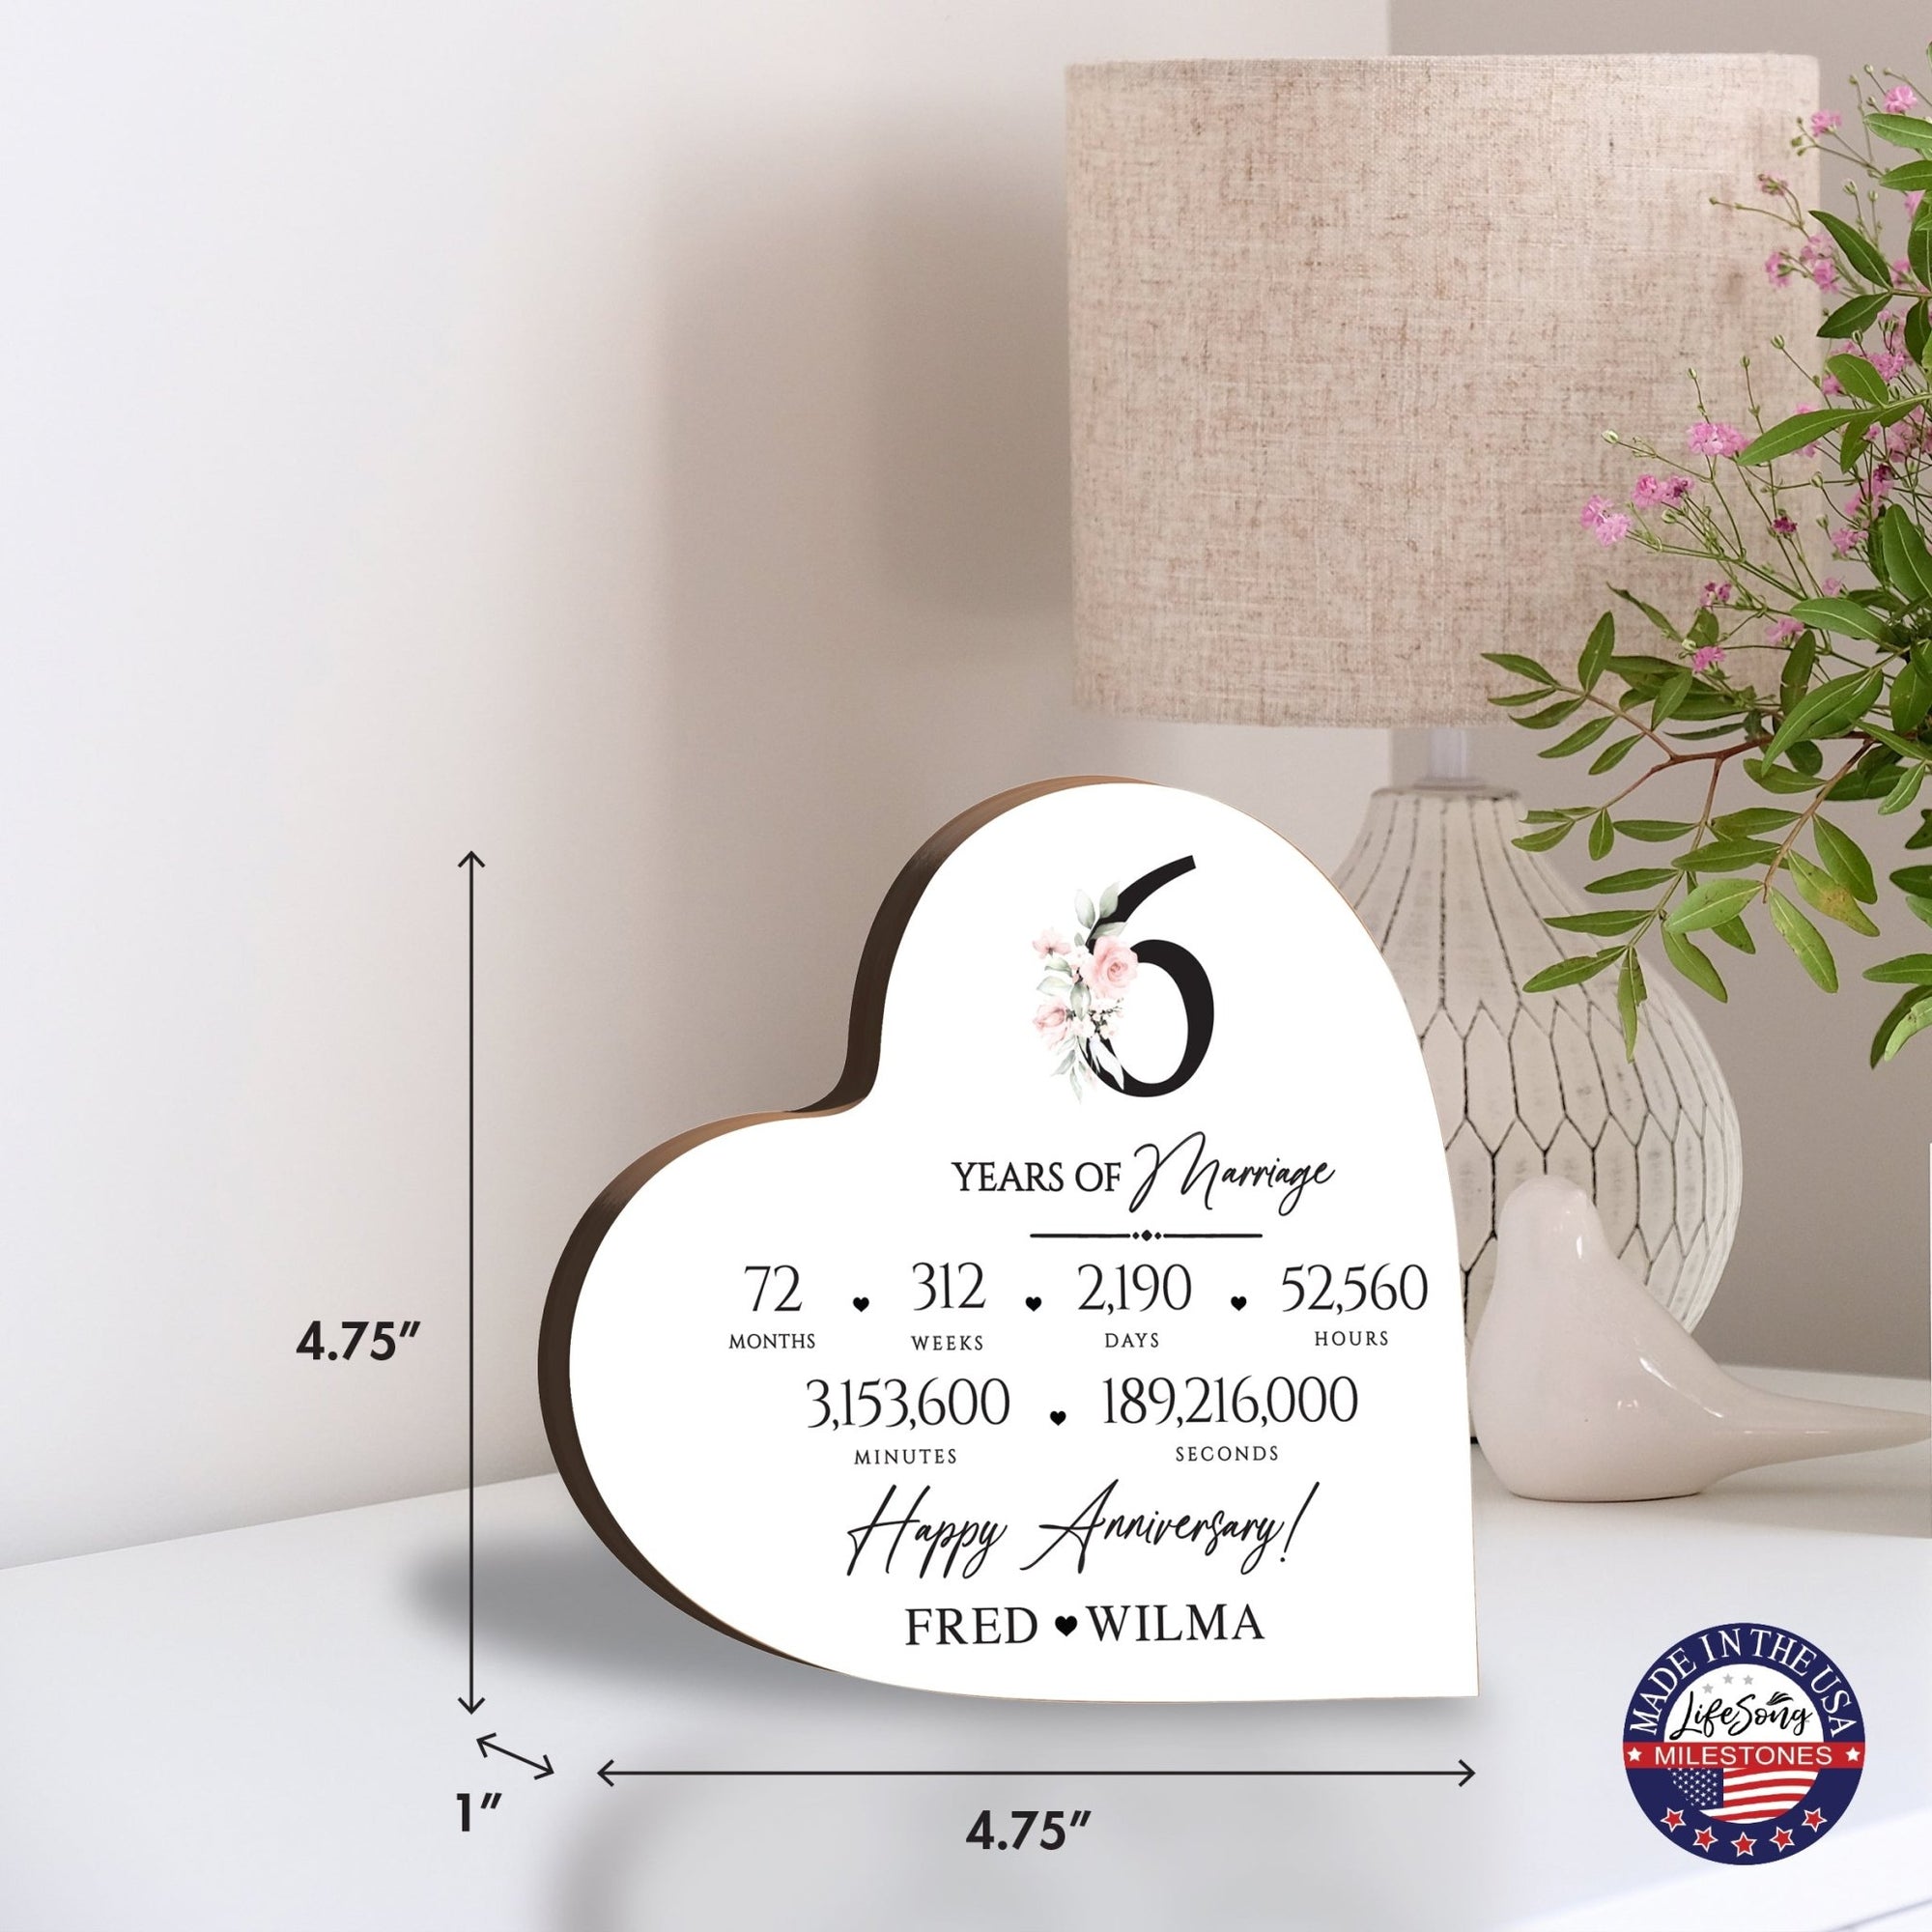 Personalized Wooden Anniversary Heart Shaped Signs - 6th Anniversary - LifeSong Milestones